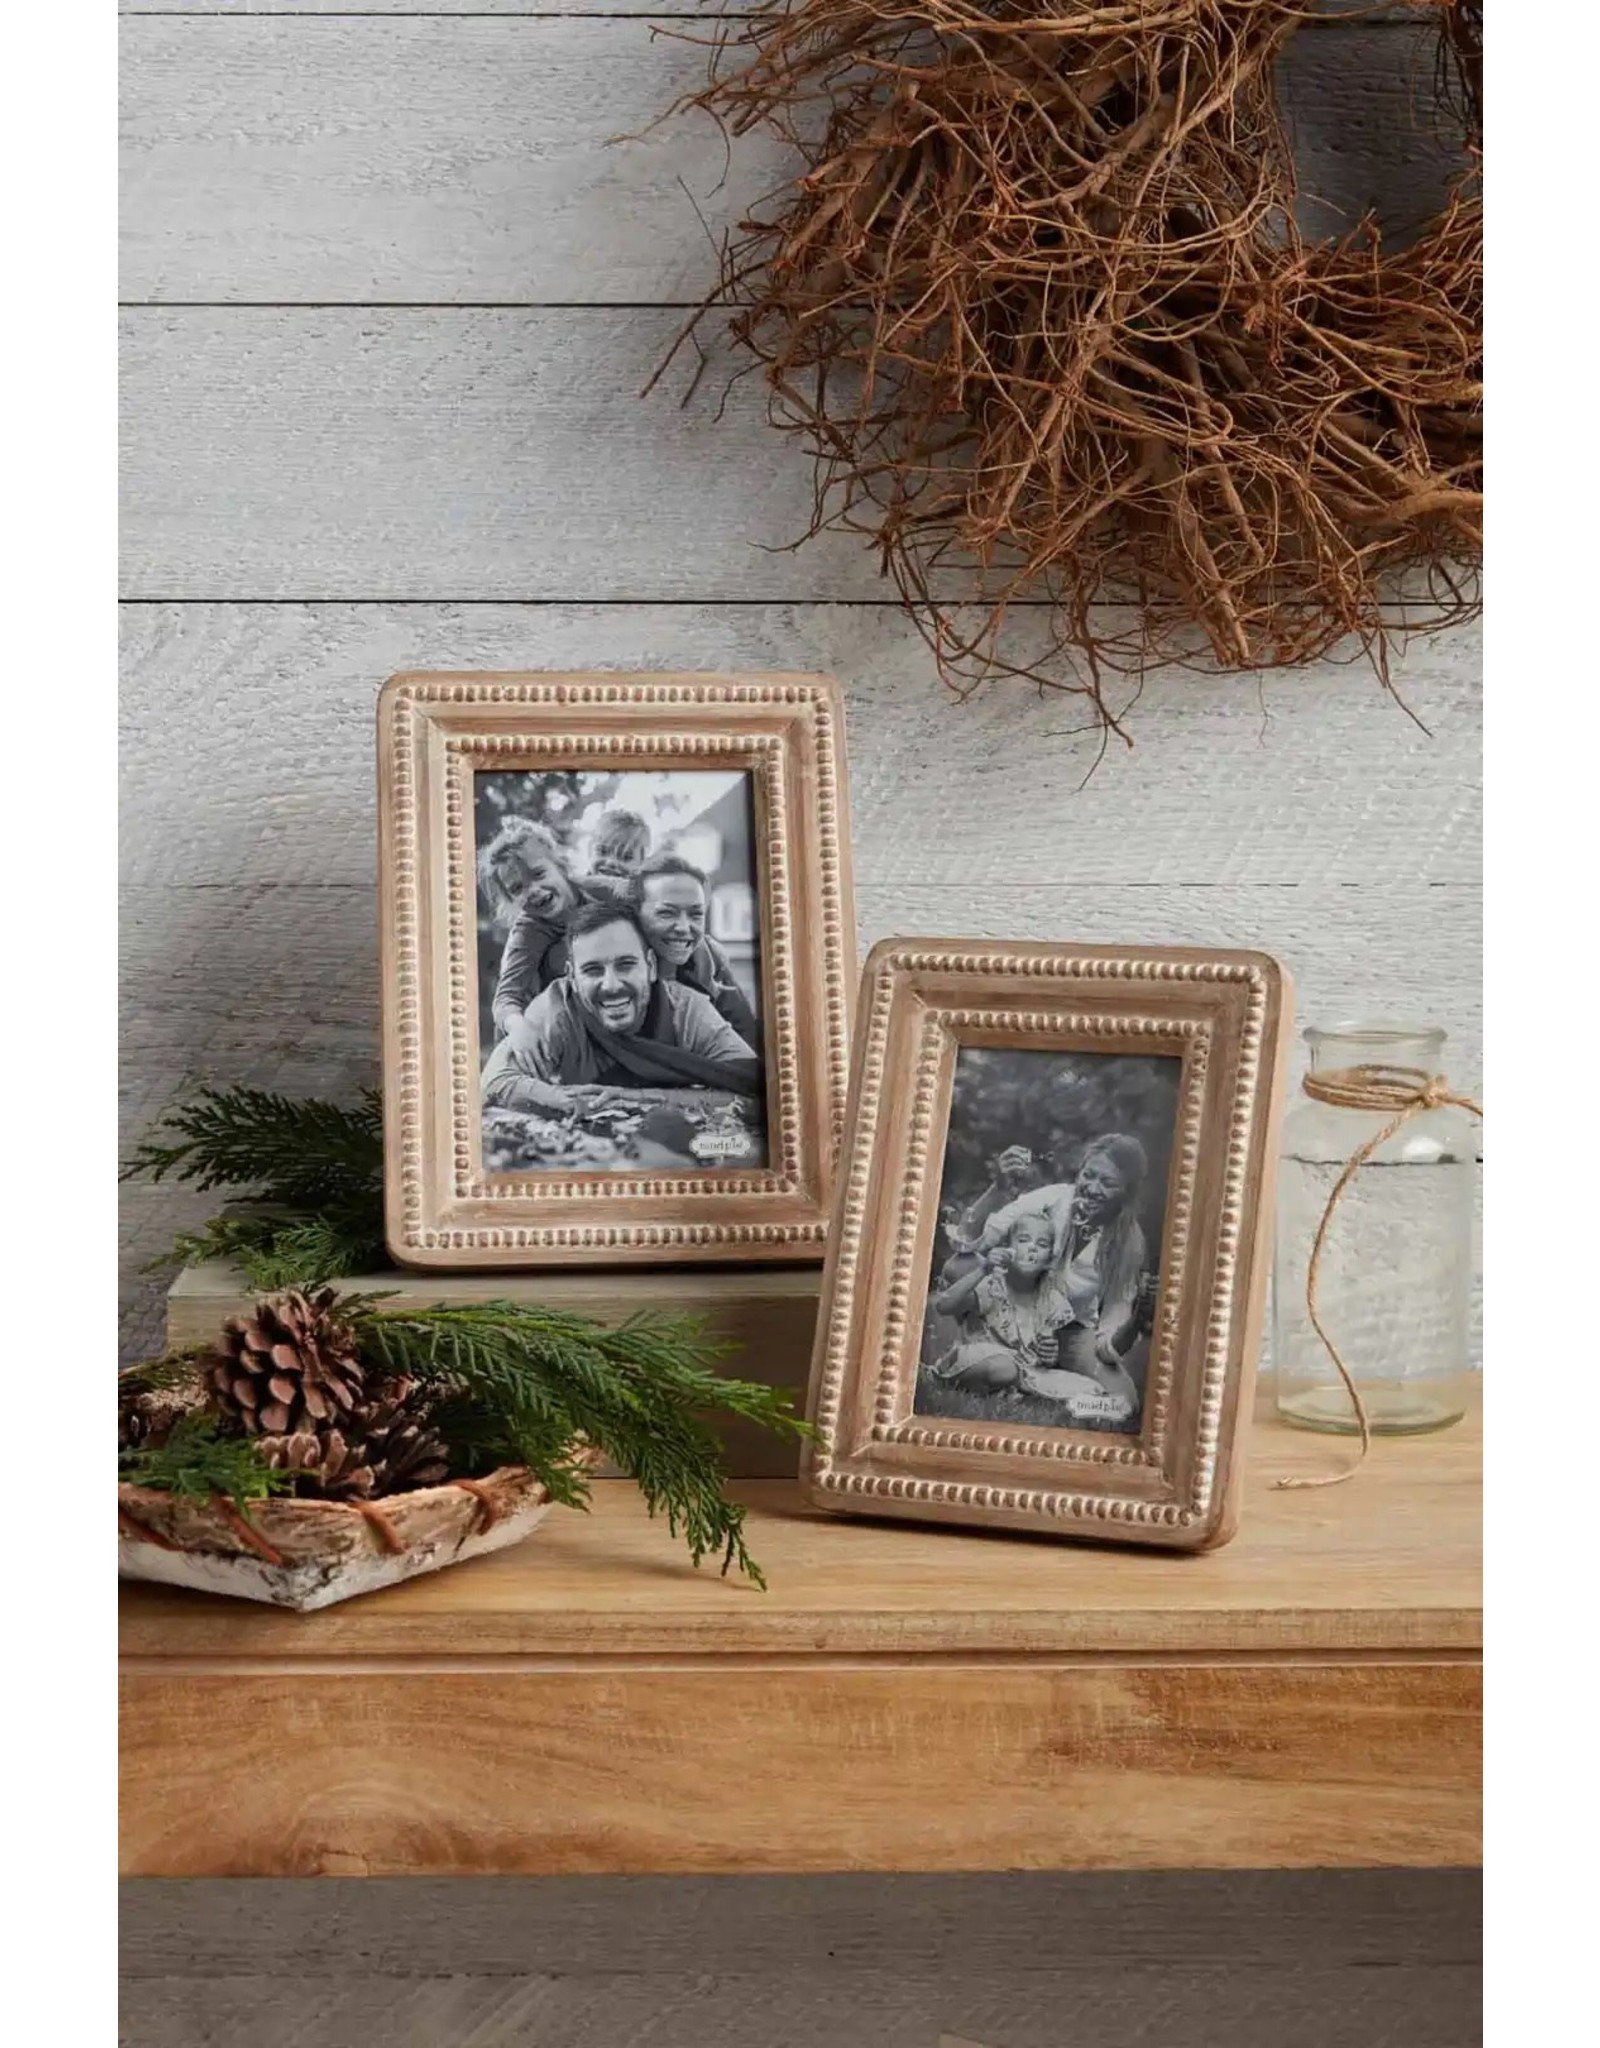 Mud Pie Beaded Wood Picture Frame Large For 5x7 Photo